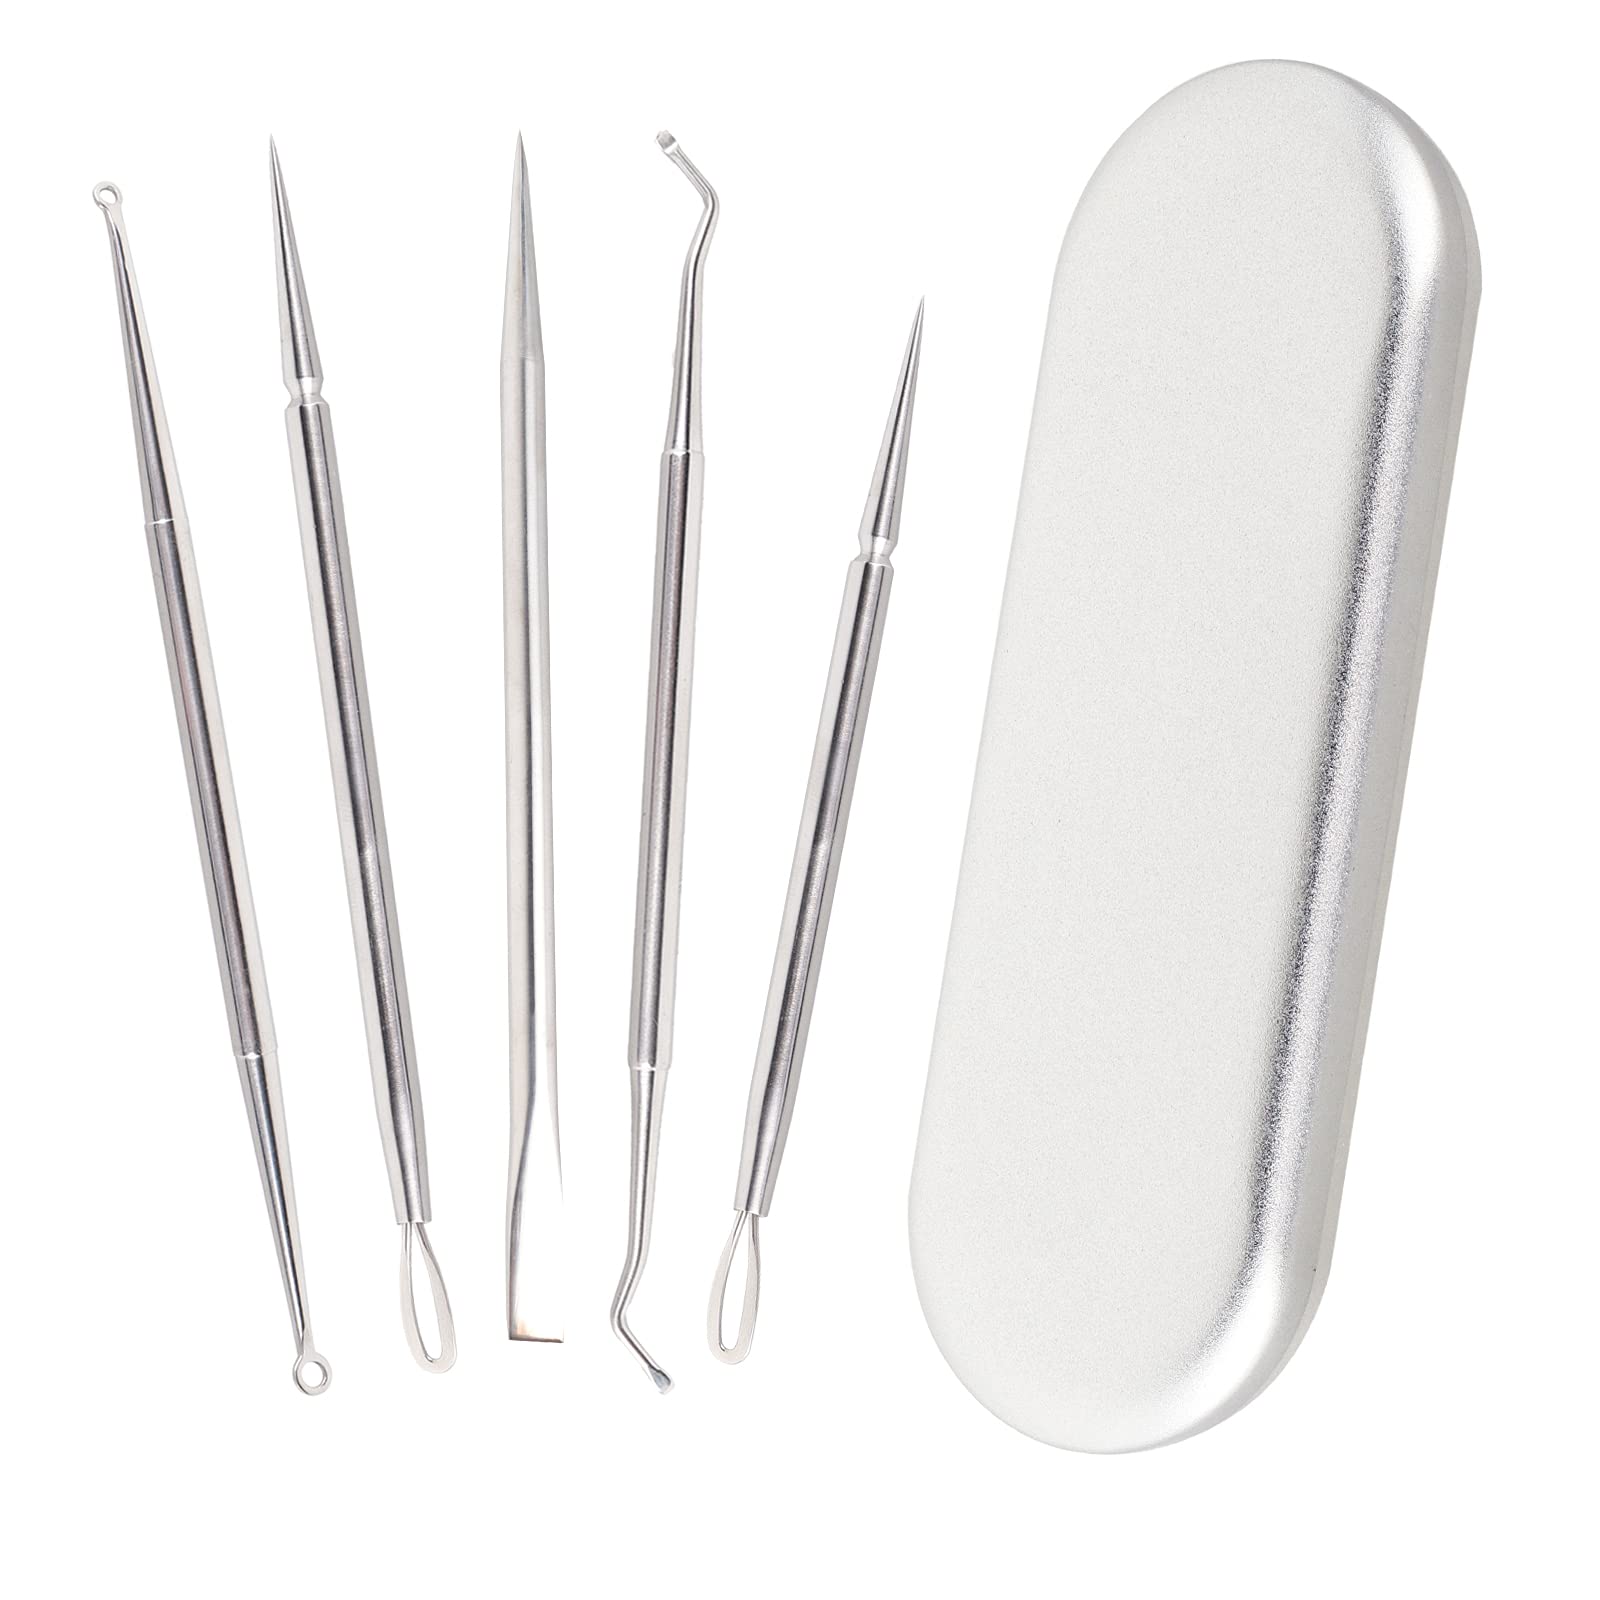 5PCS Blackhead Remover Tool Kit Professional Pimple Popper Tool Kit  Stainless Steel Comedone Zit Acne Extractor